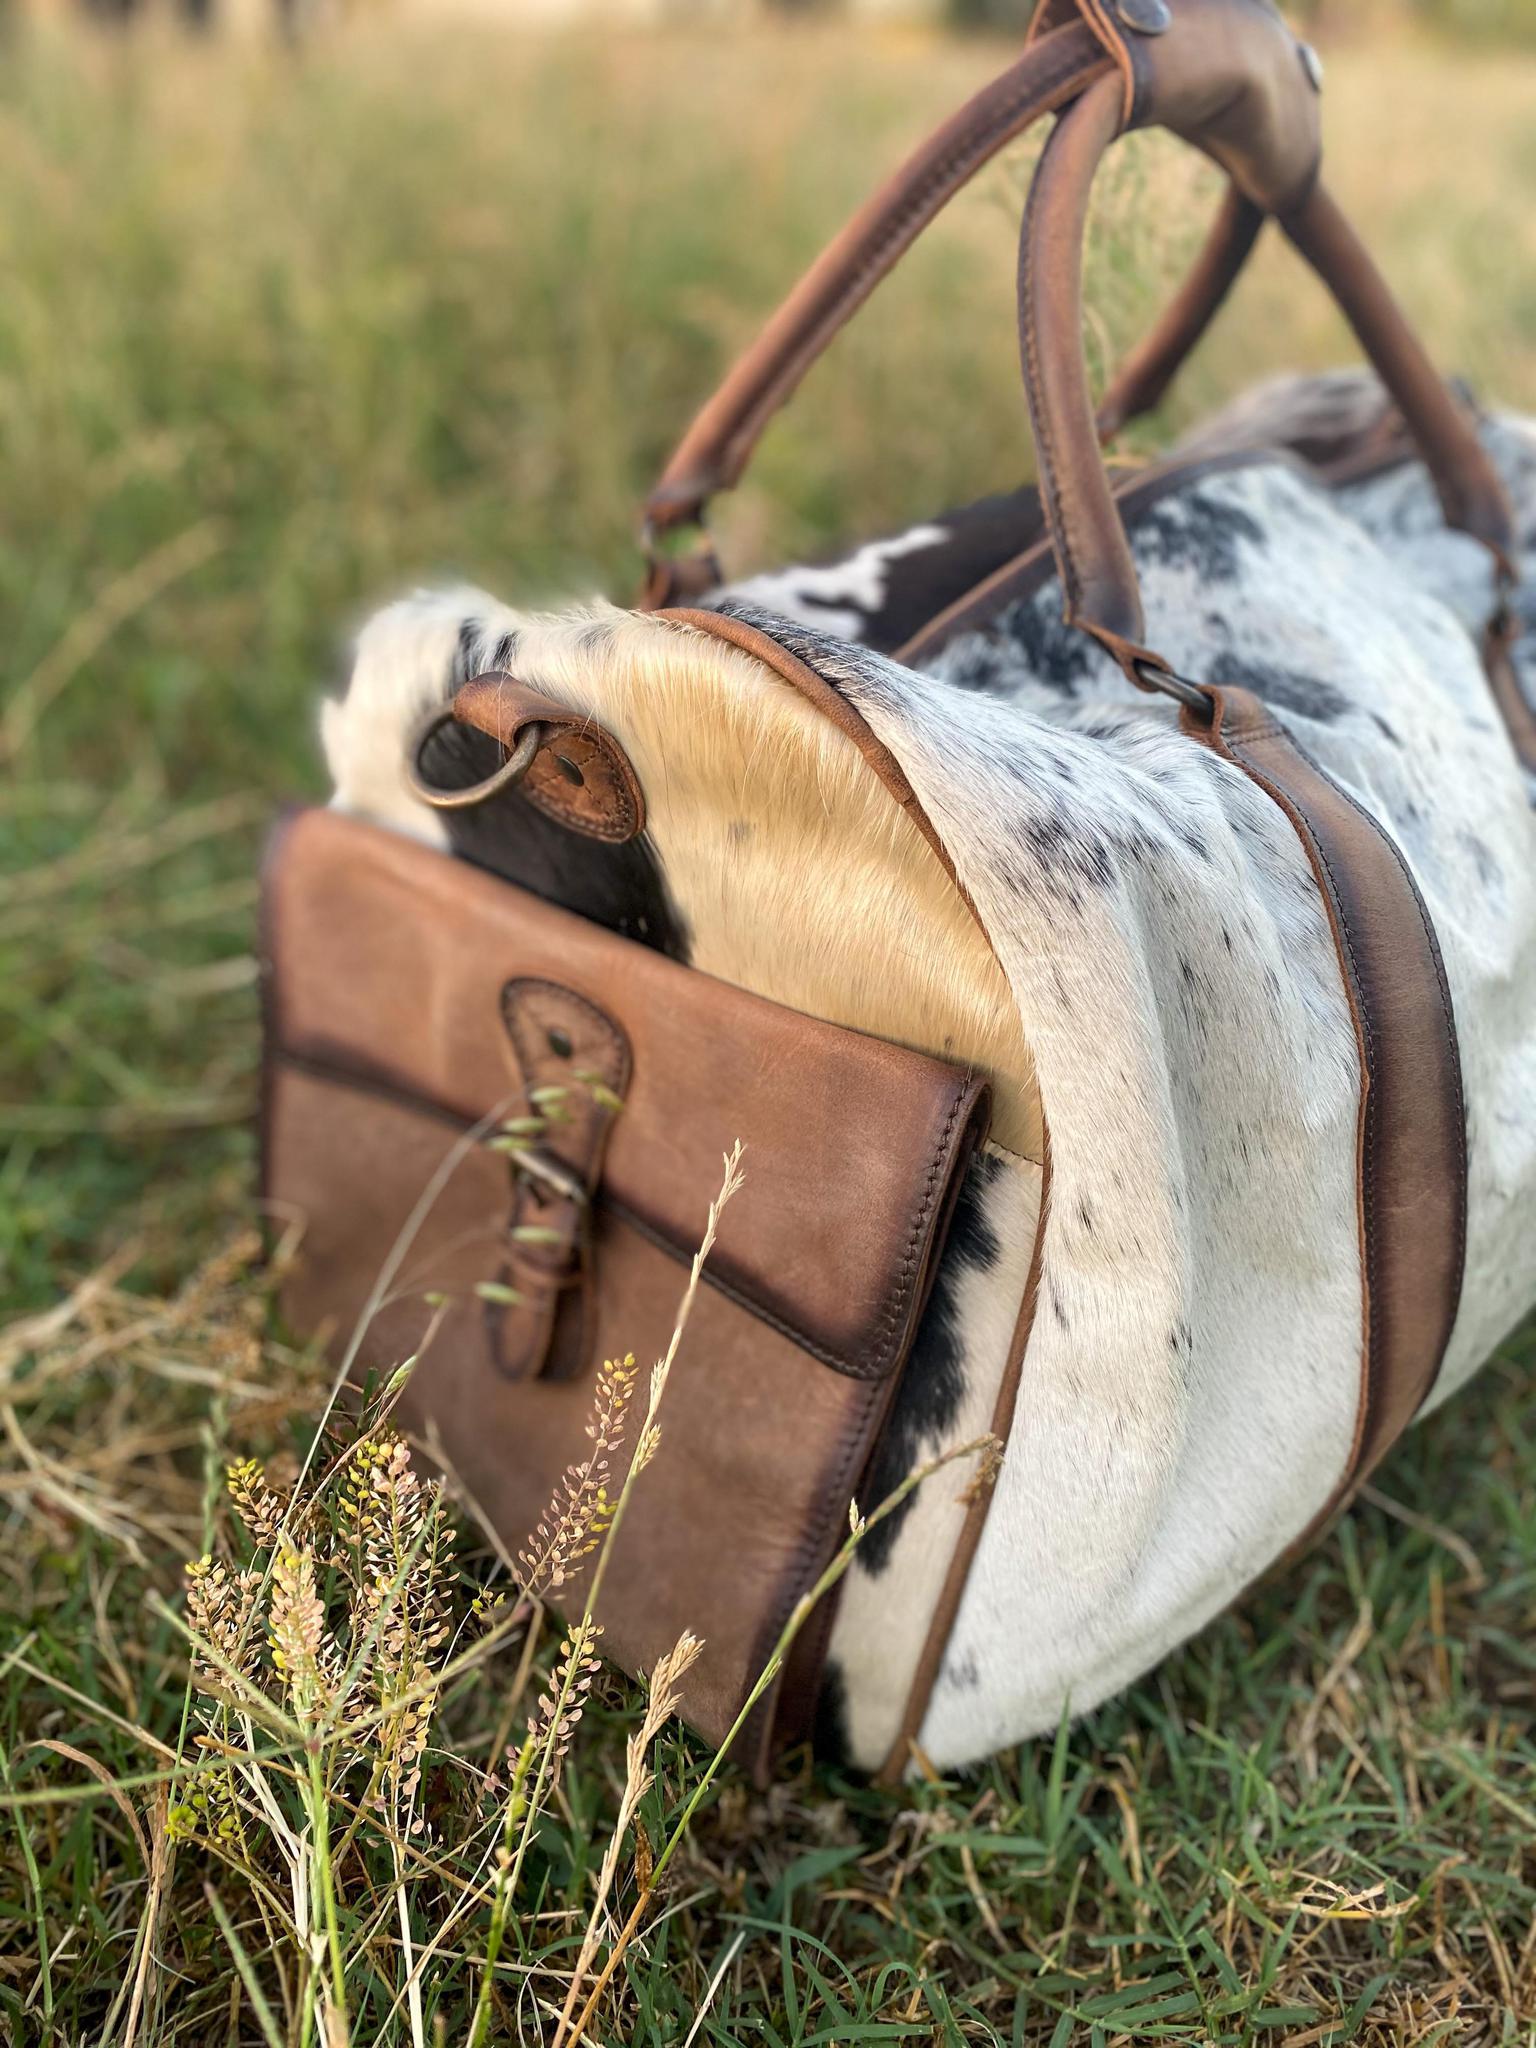 STS Foreman Duffle – Western Legacy Trading Co.